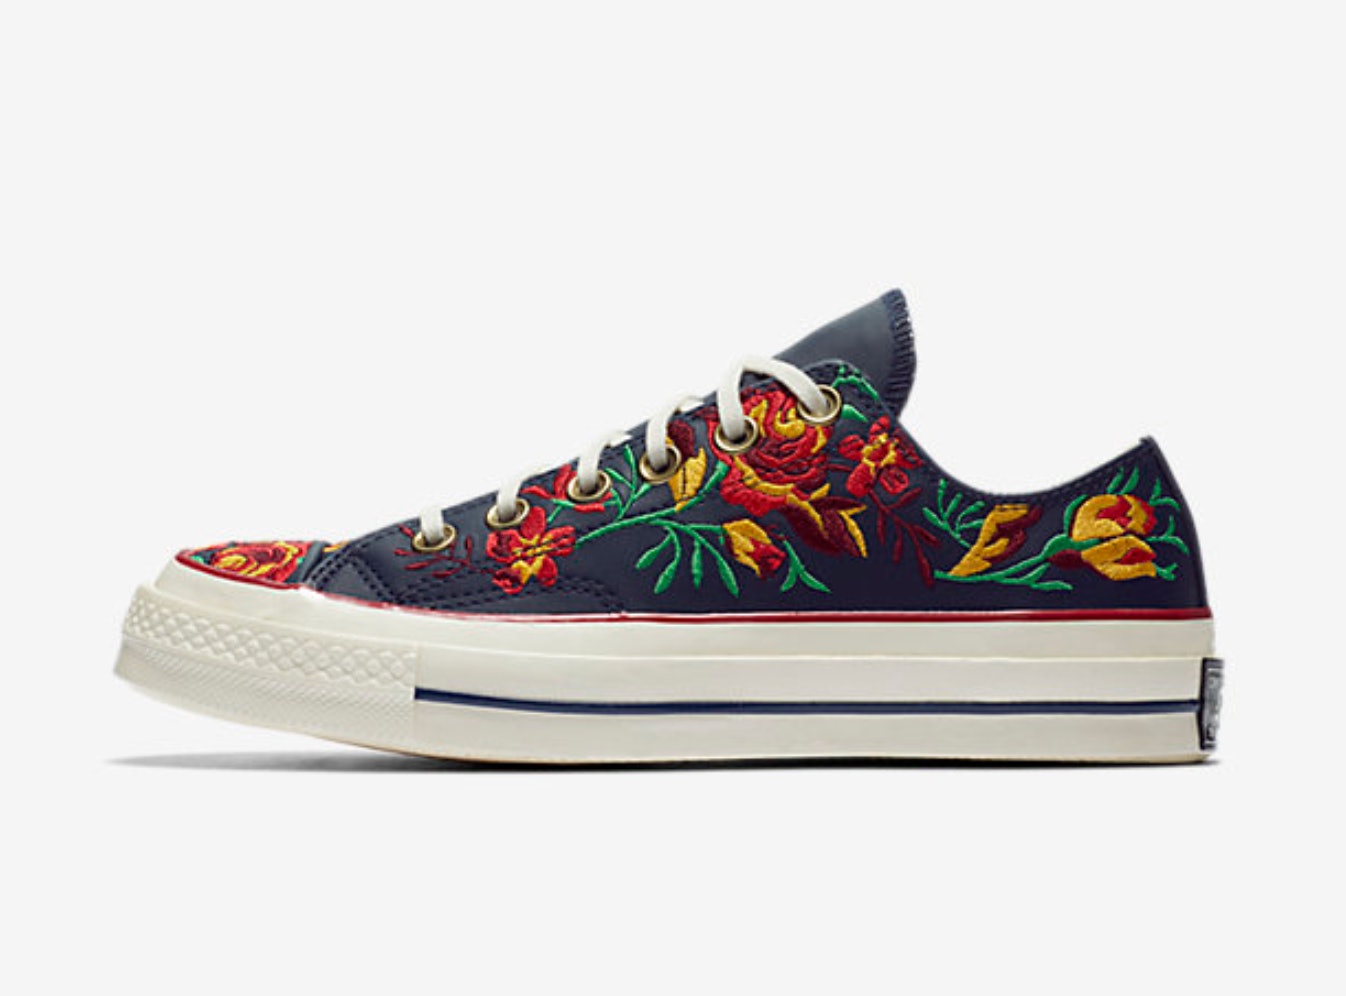 Converse's Floral Embroidered Sneakers 